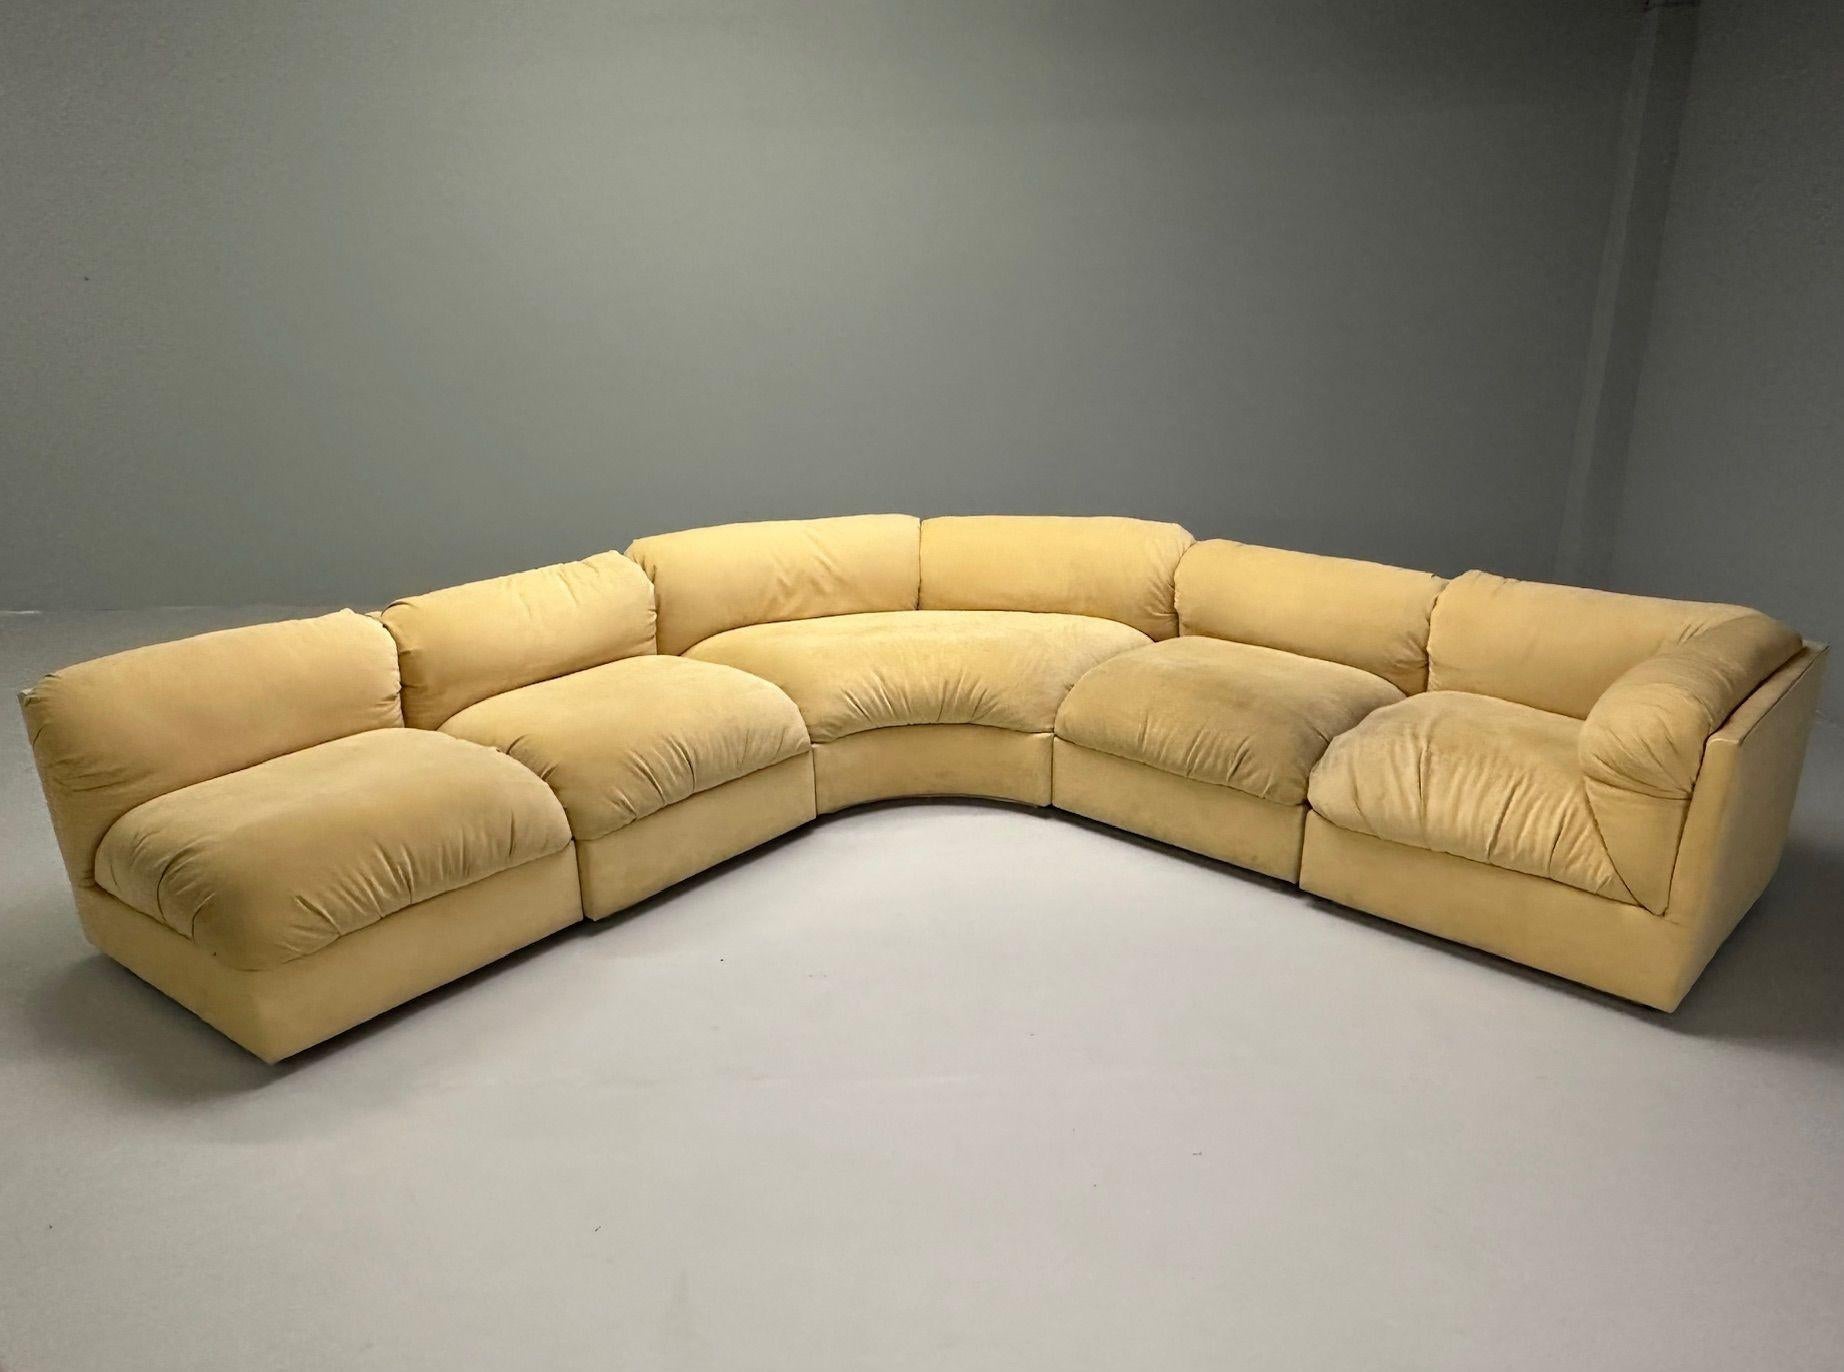 20th Century Erwin-Lambeth, Mid-Century Modern, Large Modular Sectional Sofa, Re-upholstery For Sale